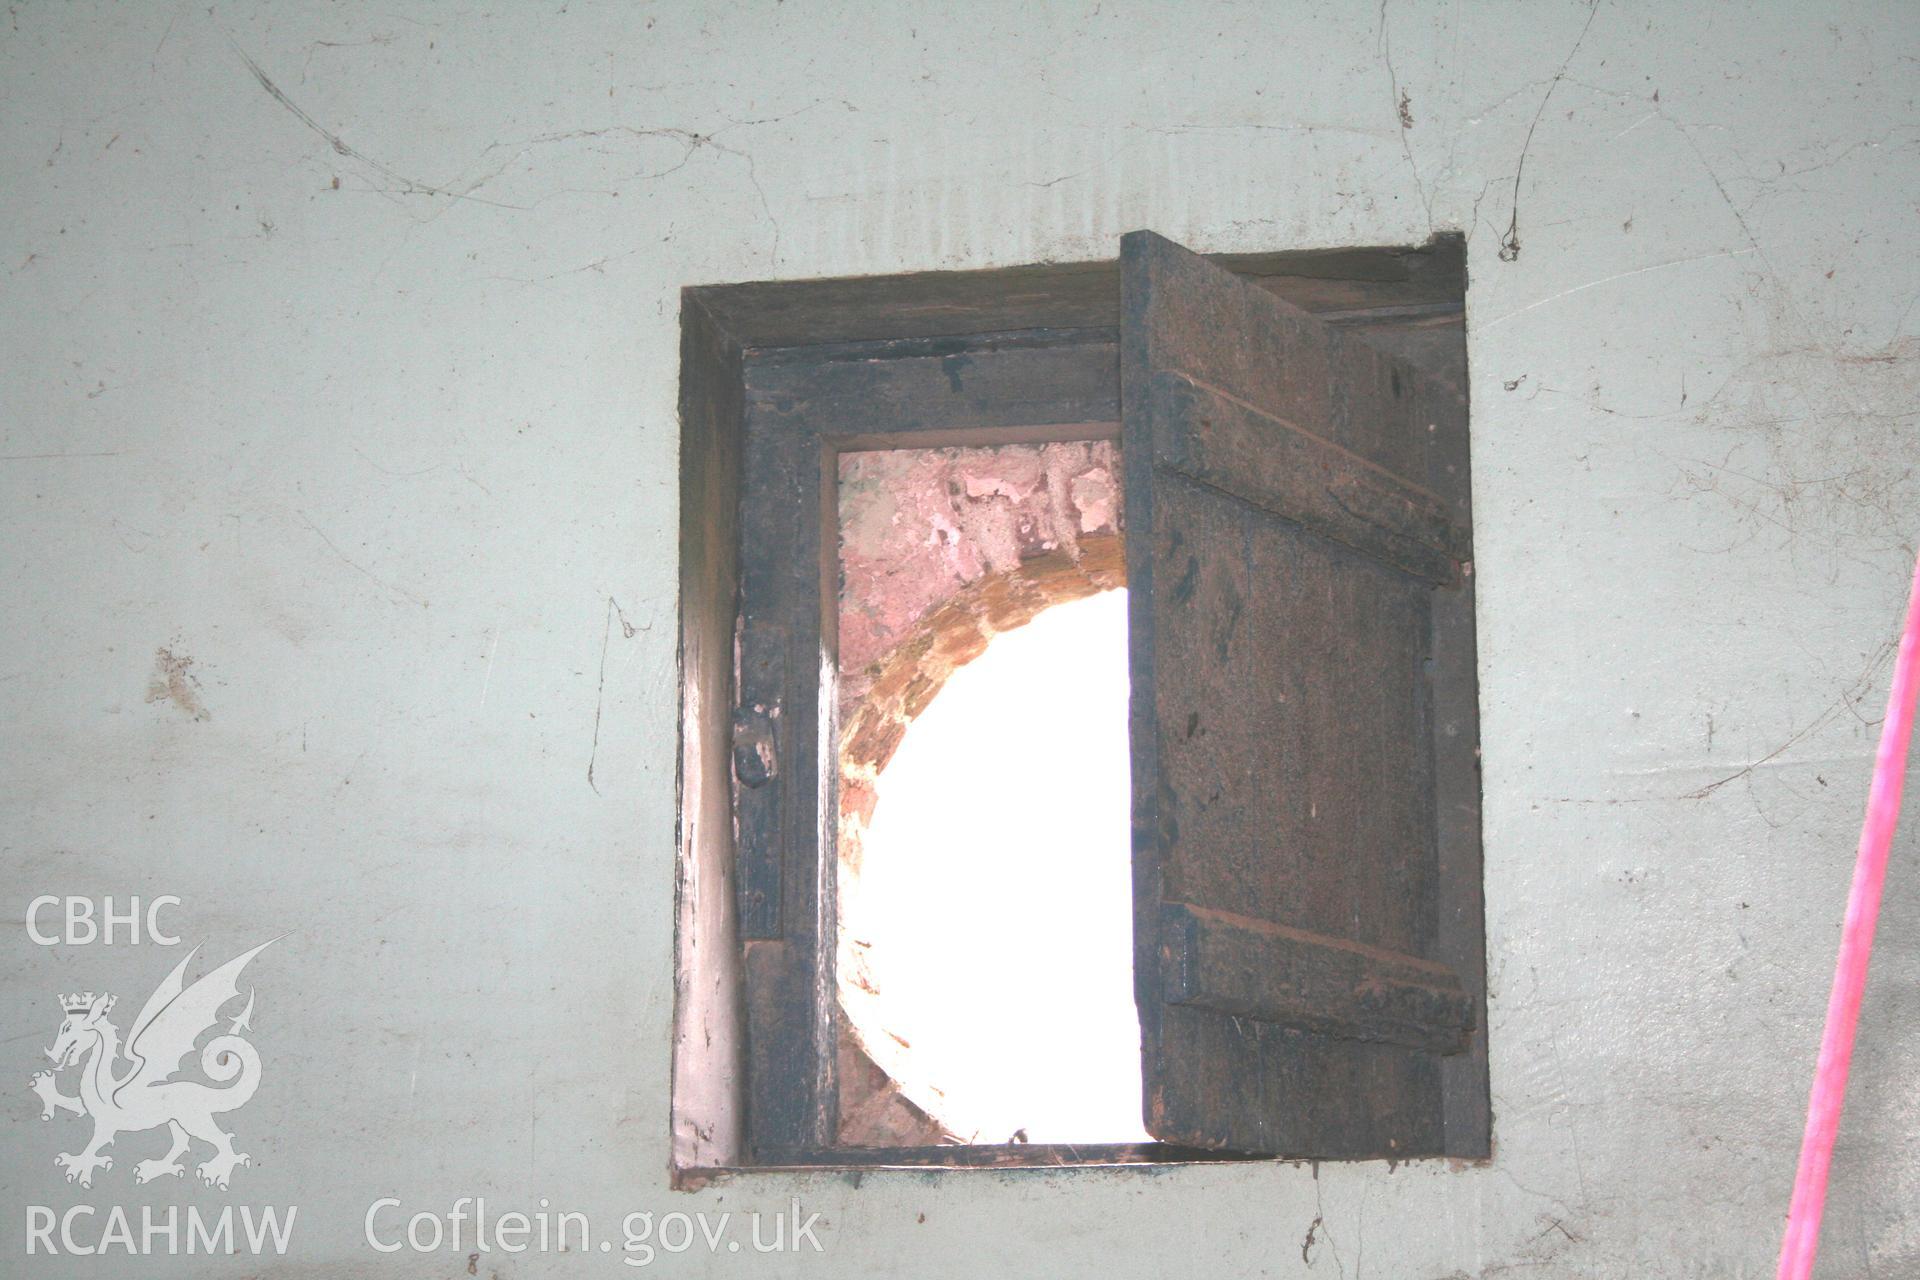 Interior view of engineering brick circular window with wooden shutter. Photographic survey of the southern range of cowhouses at Tan-y-Graig Farm, Llanfarian. Conducted by Geoff Ward and John Wiles, 11th December 2006.